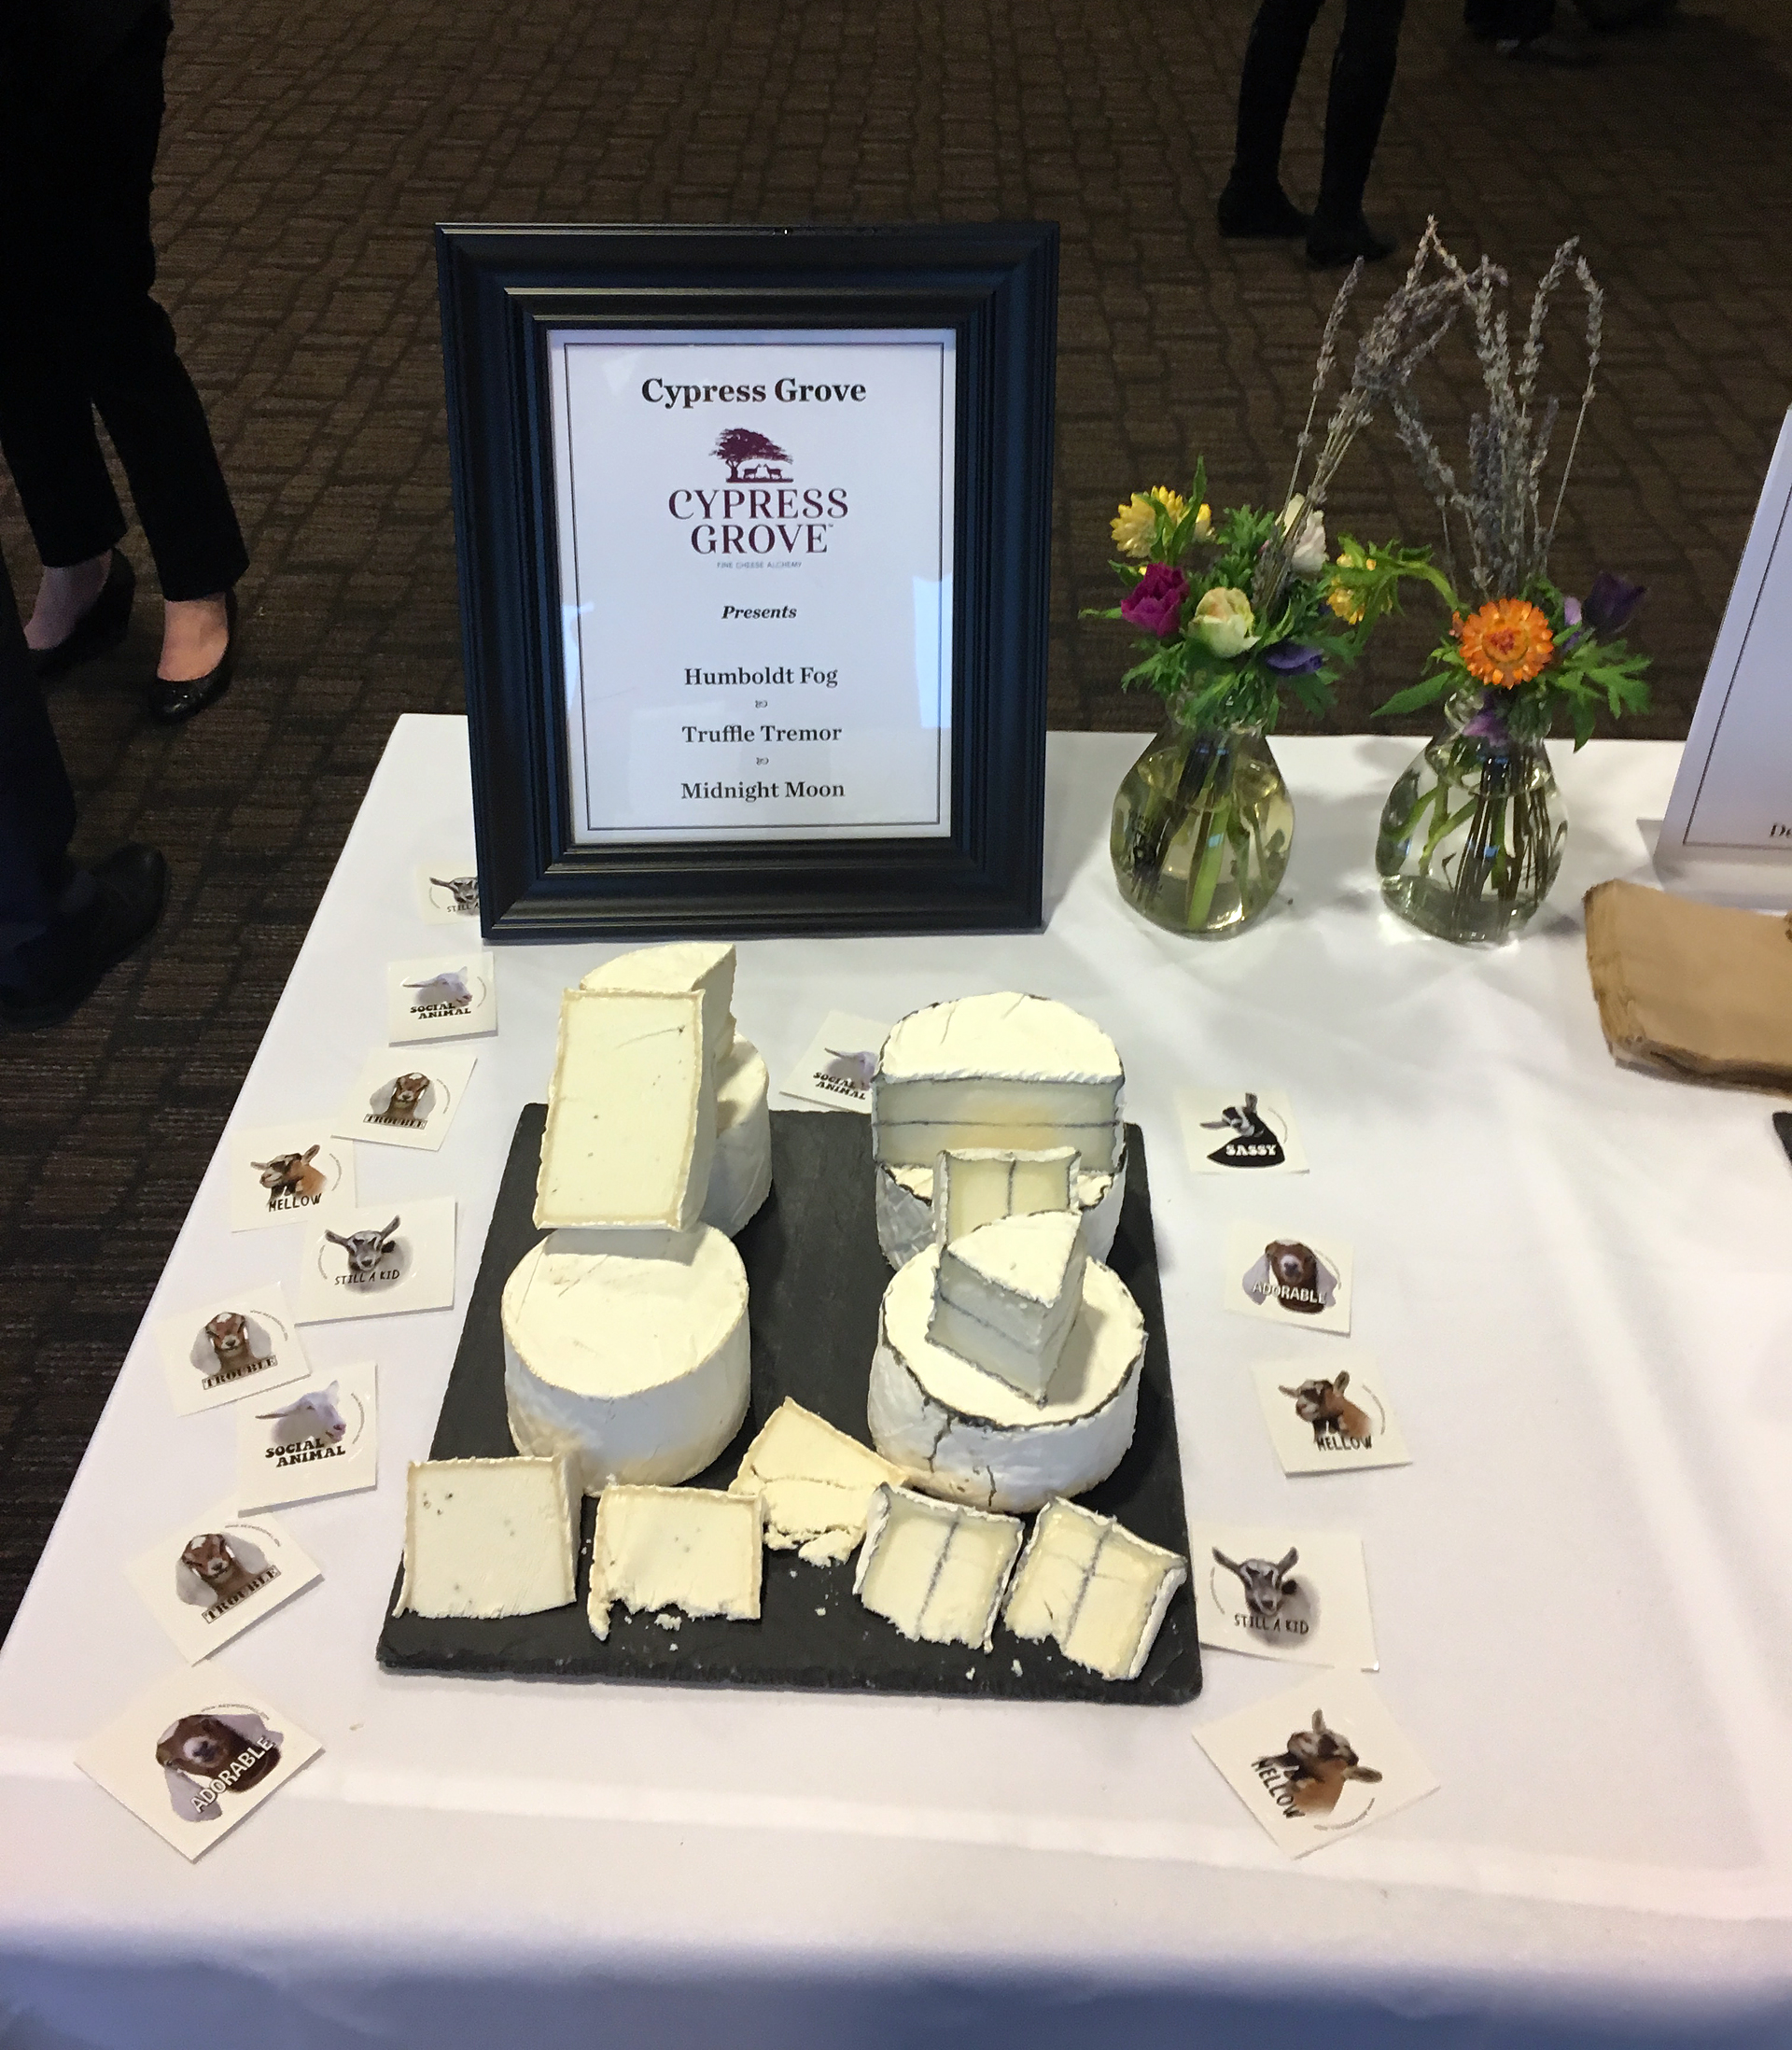 Cypress Grove Cheese: A display of 3 cheeses from Cypress Grove